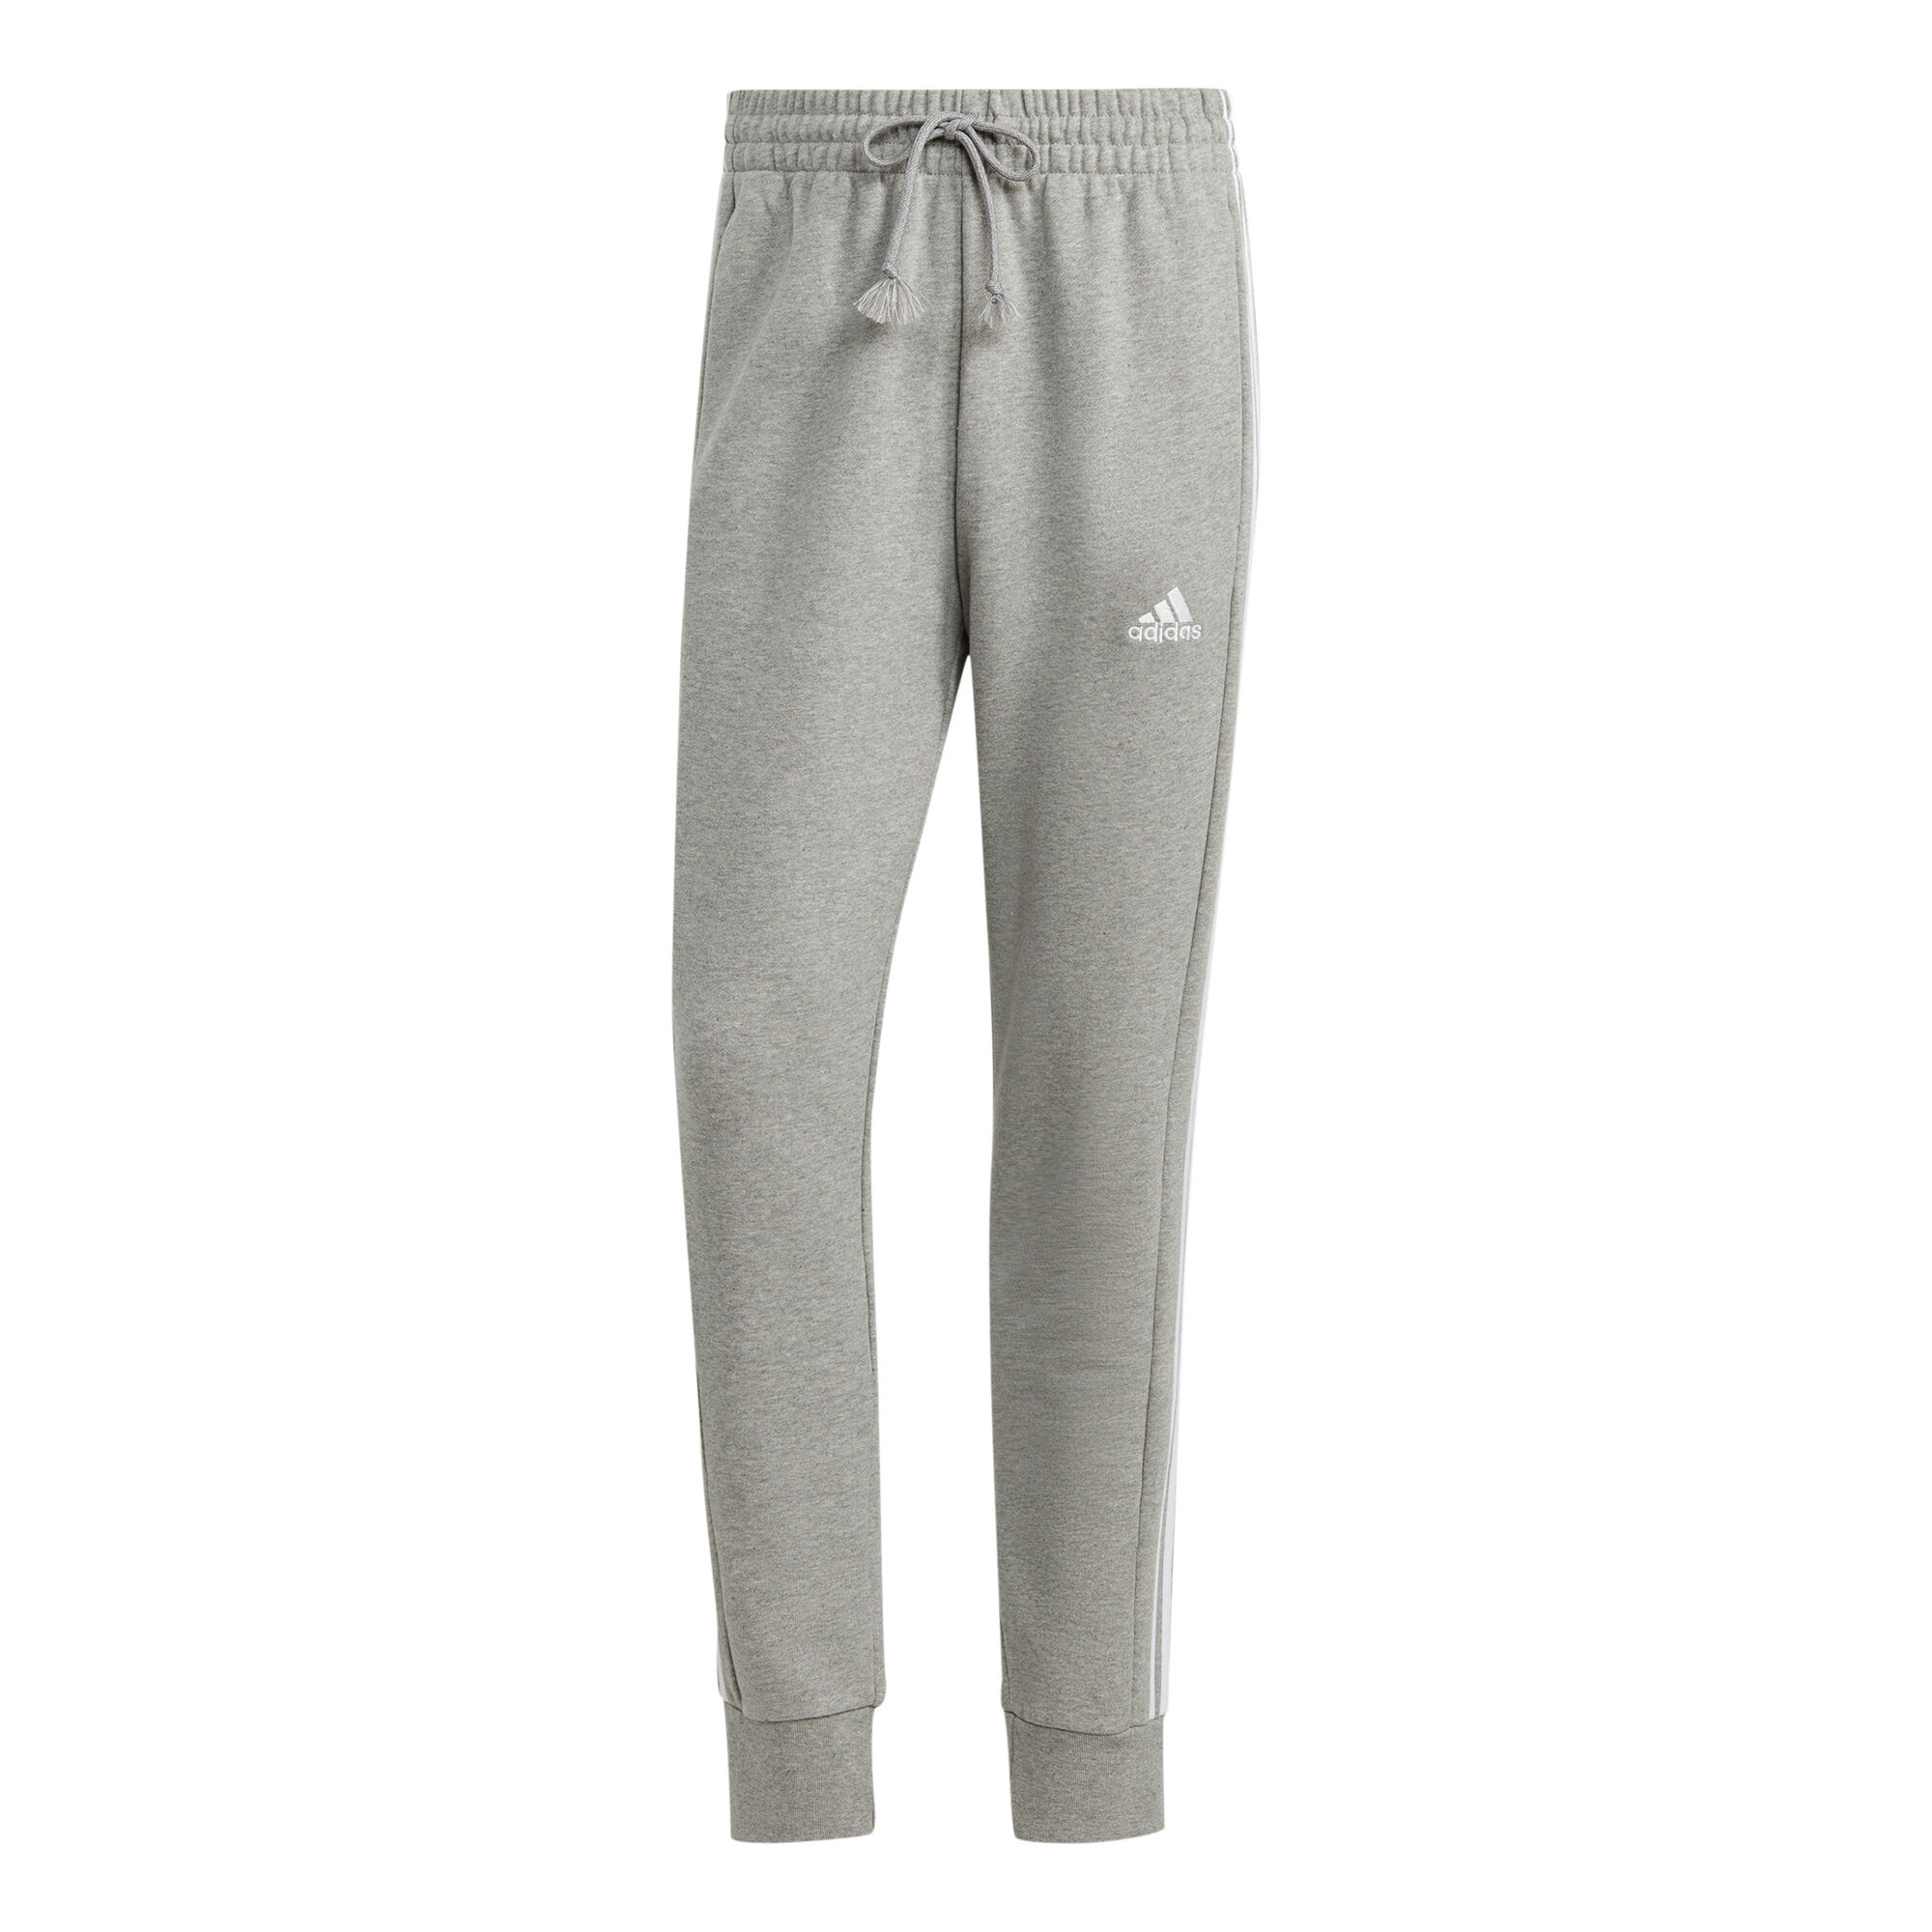 Manchester United adidas Essentials 3-Stripes French Terry Cuffed Joggers -  Medium Grey Heather/White - Womens